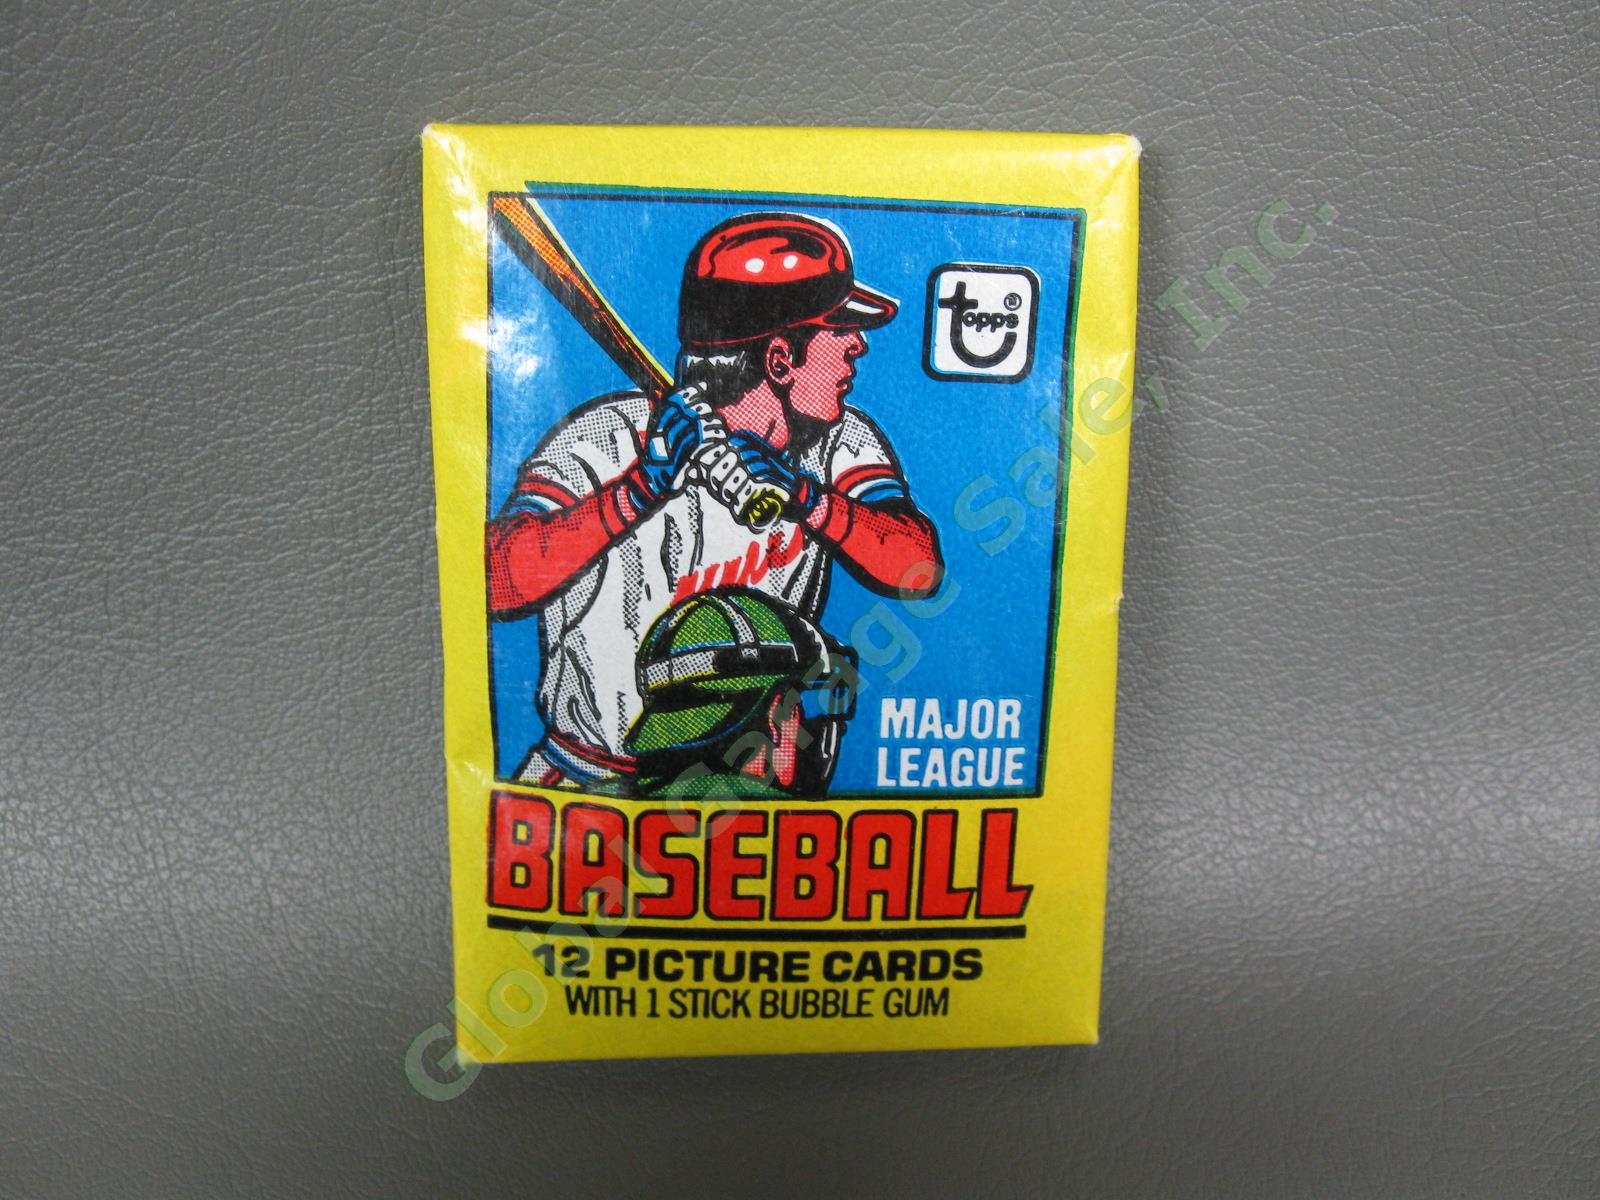 SEALED 1979 RARE UNOPENED Topps Baseball Picture Trading Card Original Wax Pack